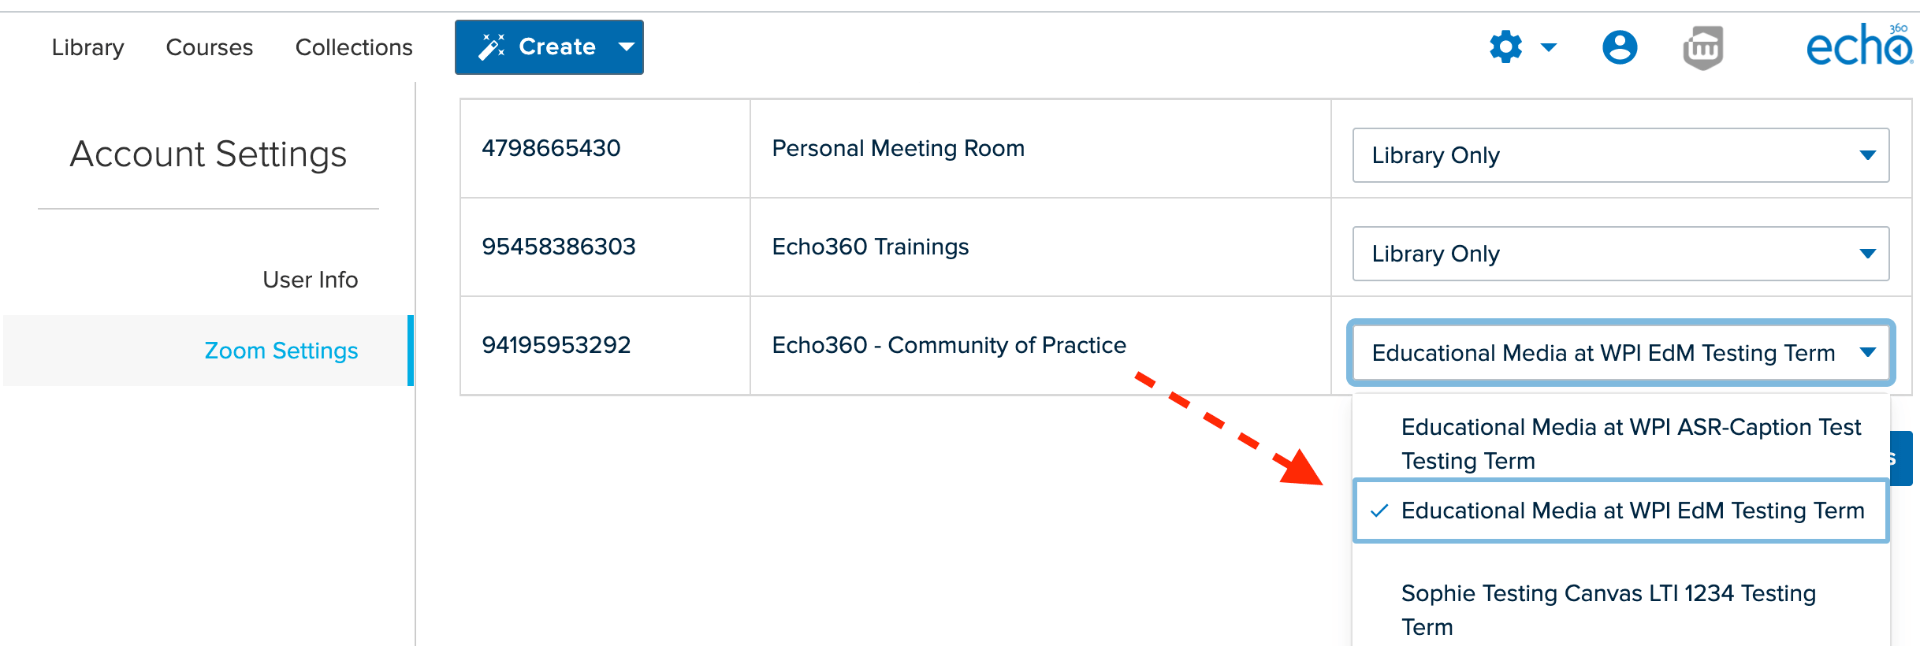 An arrow points from the Zoom meeting list to the Echo360 course to which the Zoom meeting should be associated.